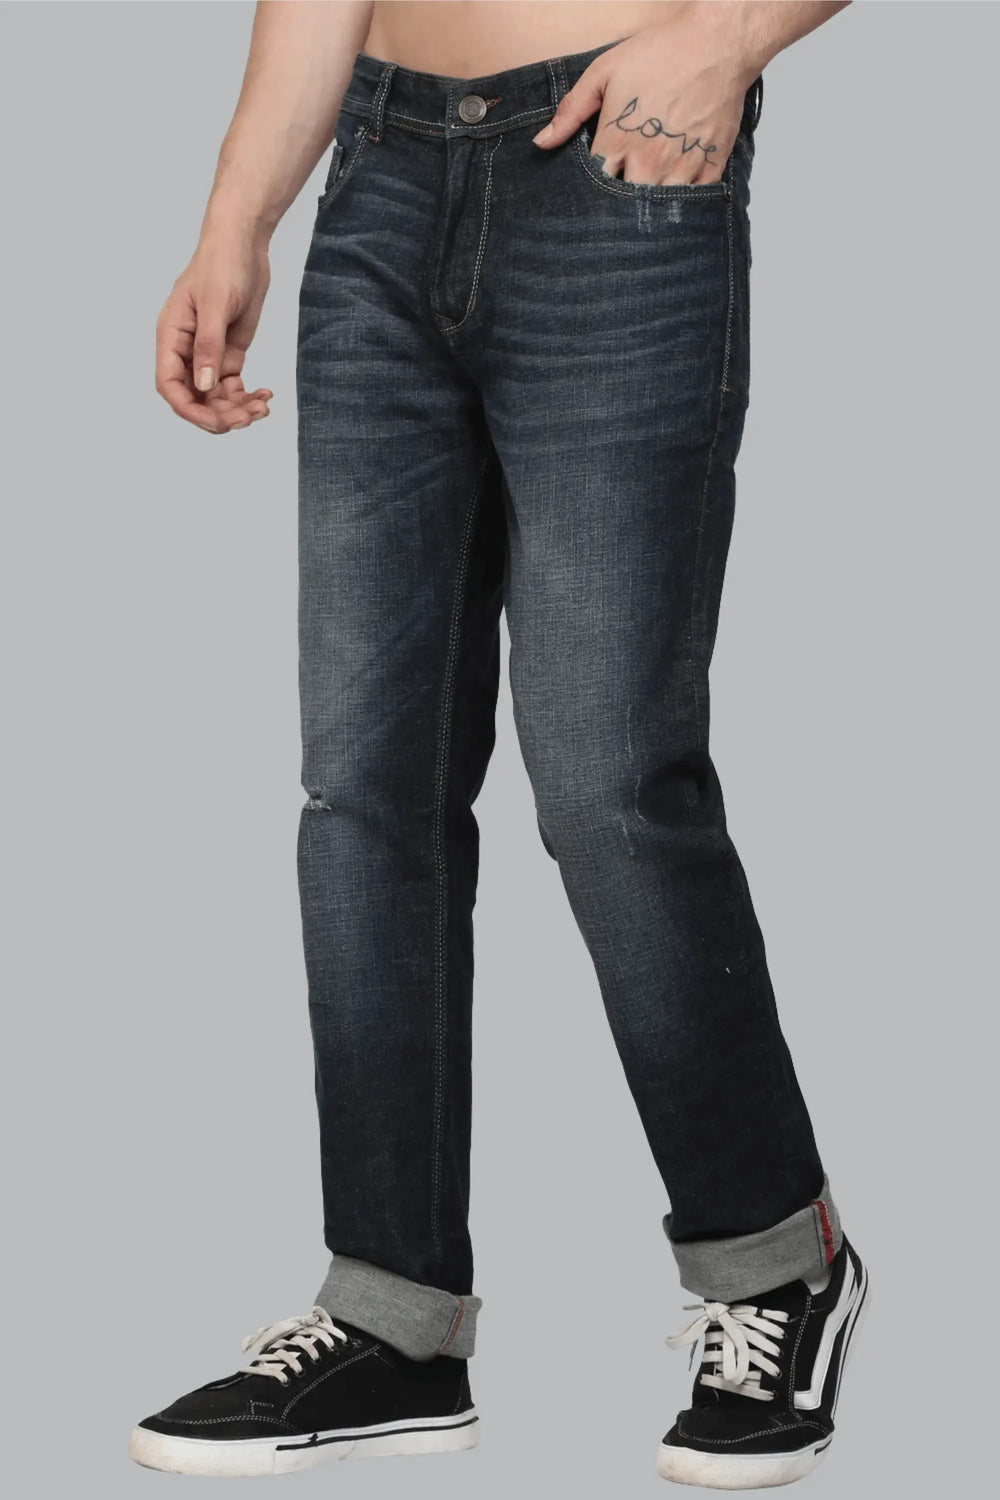 The Relaxed-fit denim jeans are made of high-quality premium fabric which gives you a very premium look and comfort in wear if you are looking comfort with quality then this denim jeans is made for you